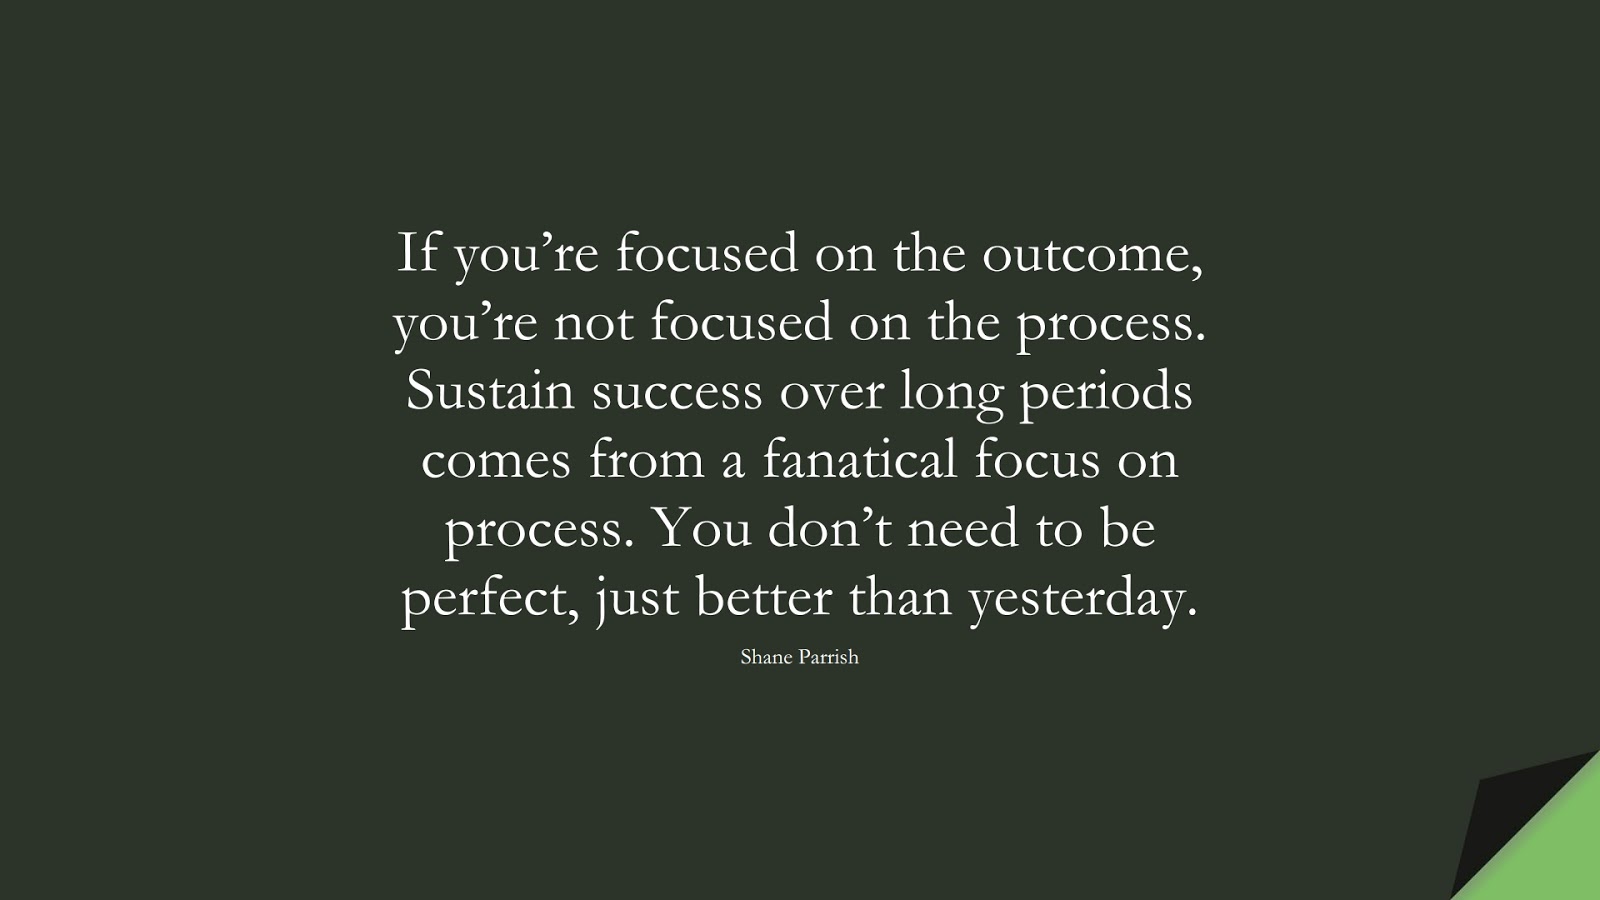 If you’re focused on the outcome, you’re not focused on the process. Sustain success over long periods comes from a fanatical focus on process. You don’t need to be perfect, just better than yesterday. (Shane Parrish);  #PerseveranceQuotes